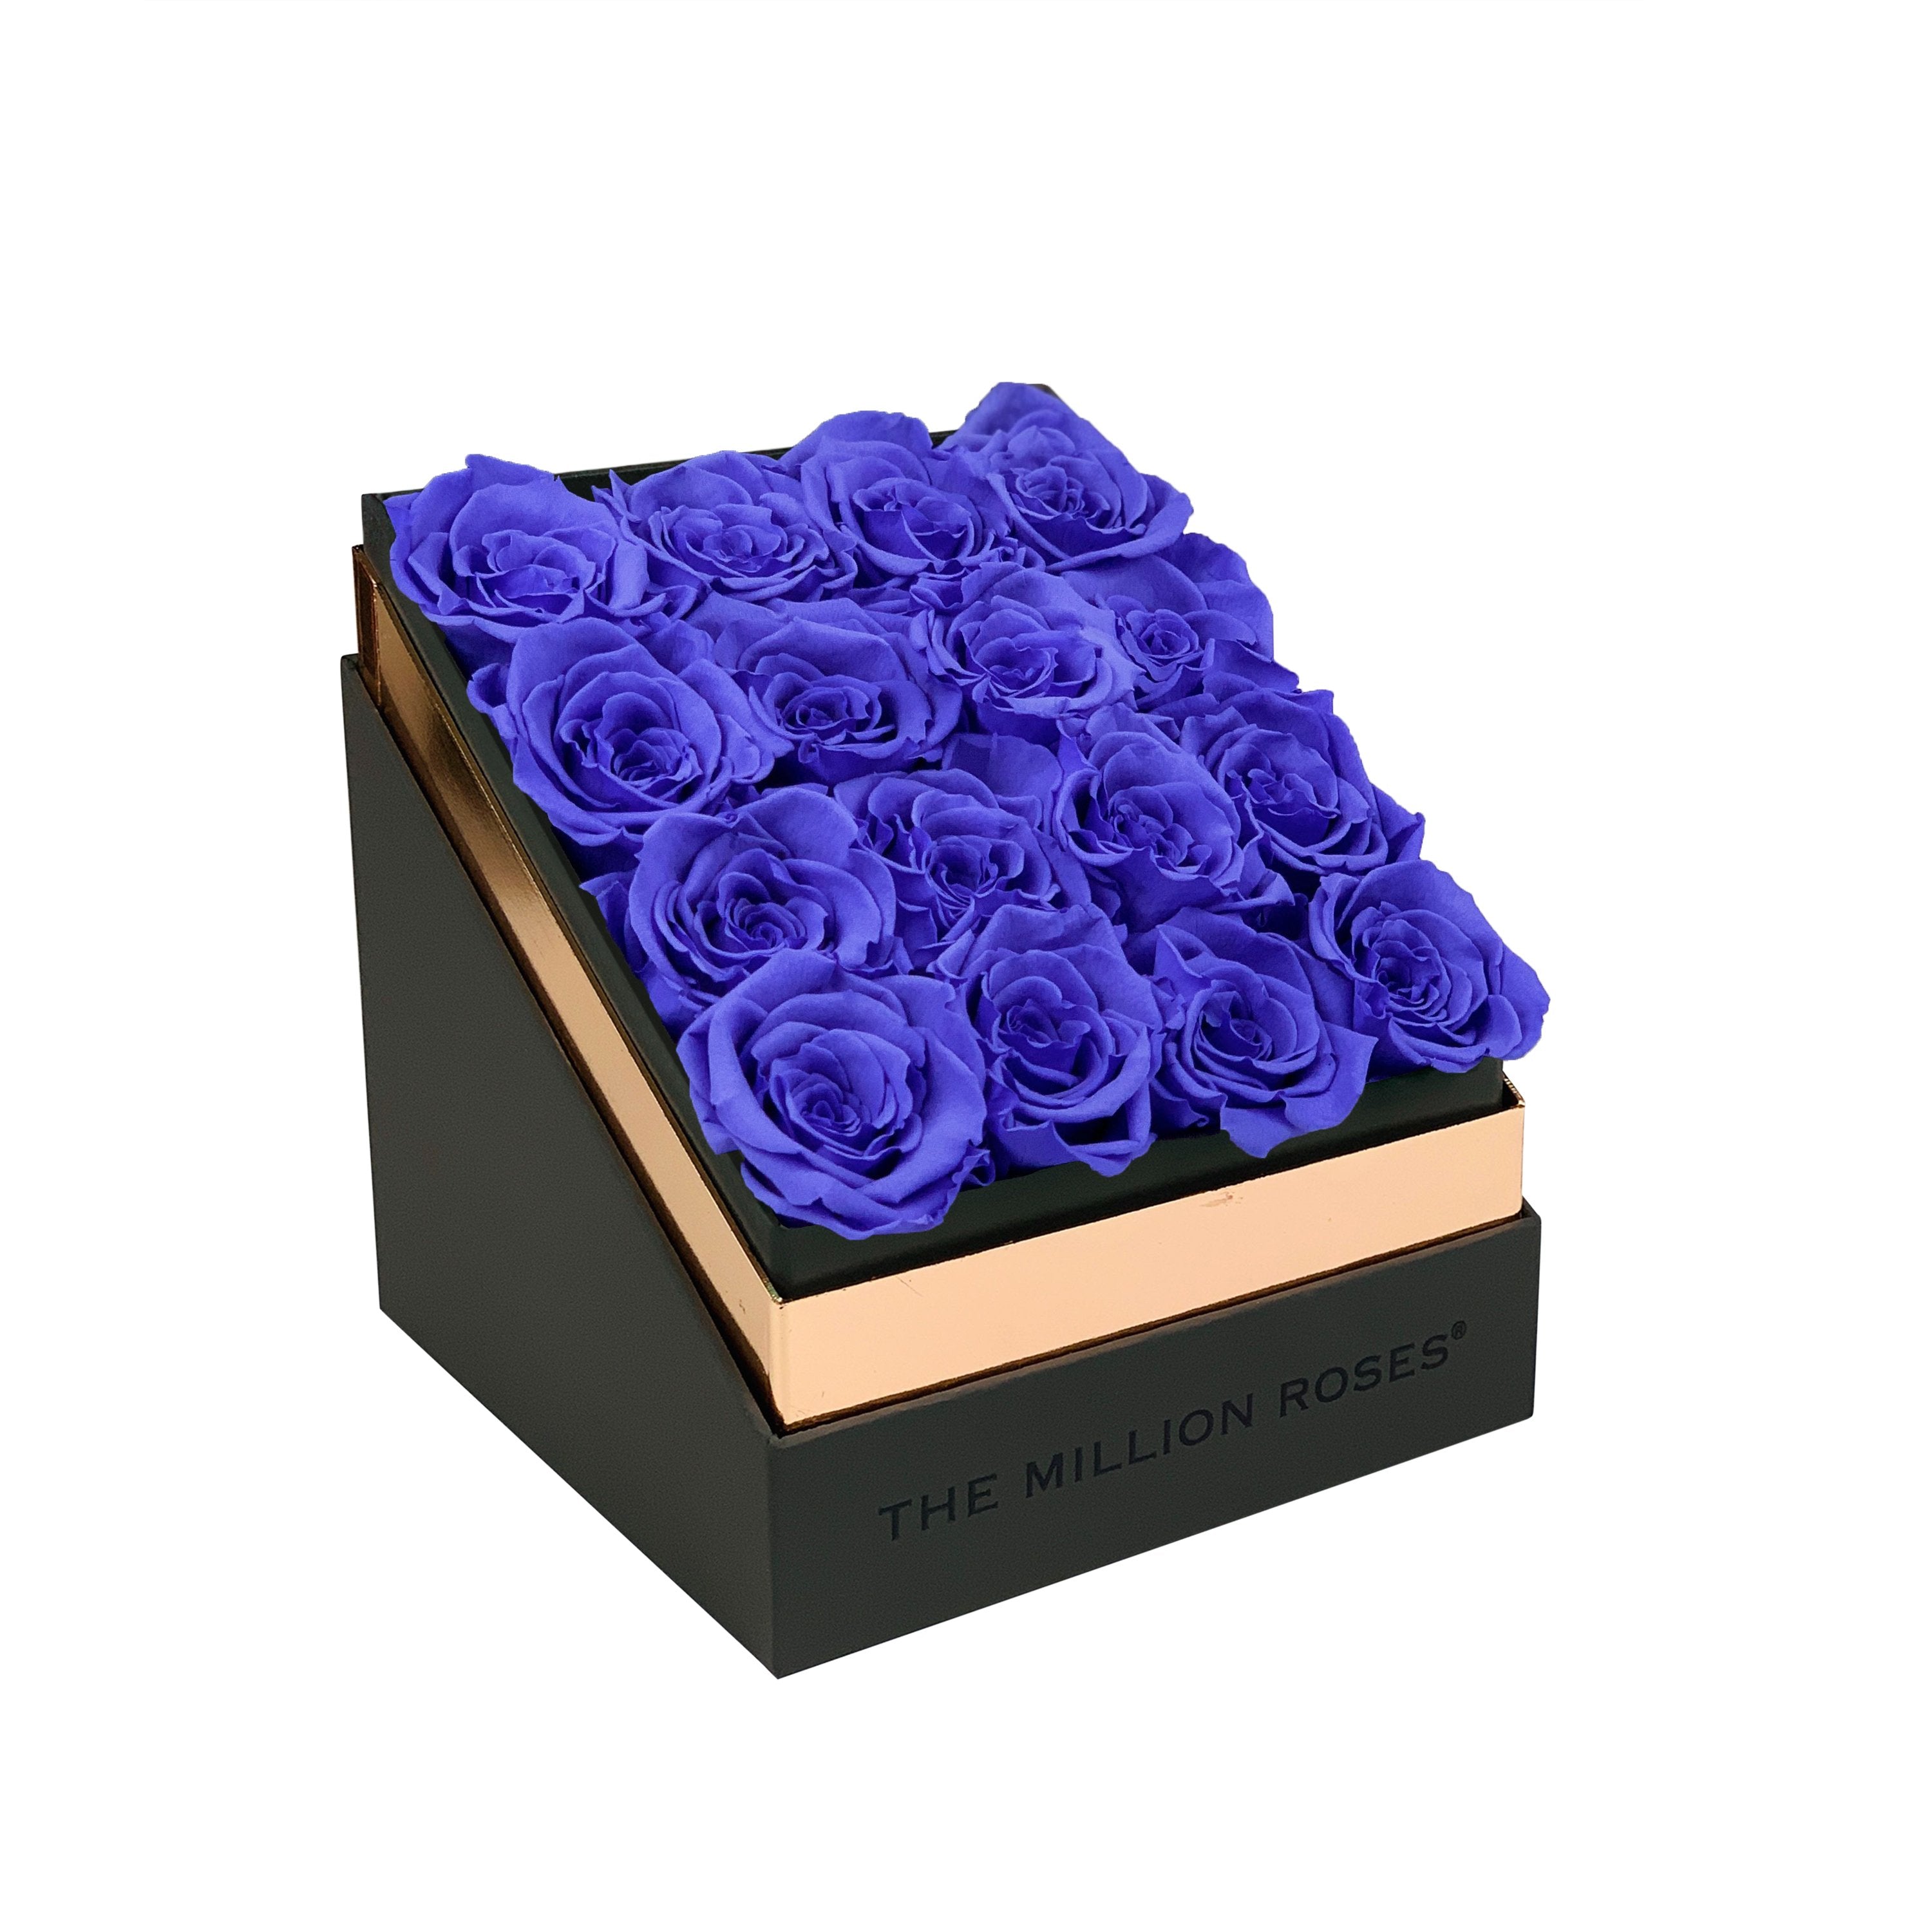 The Square - Gray Box - Violet Roses